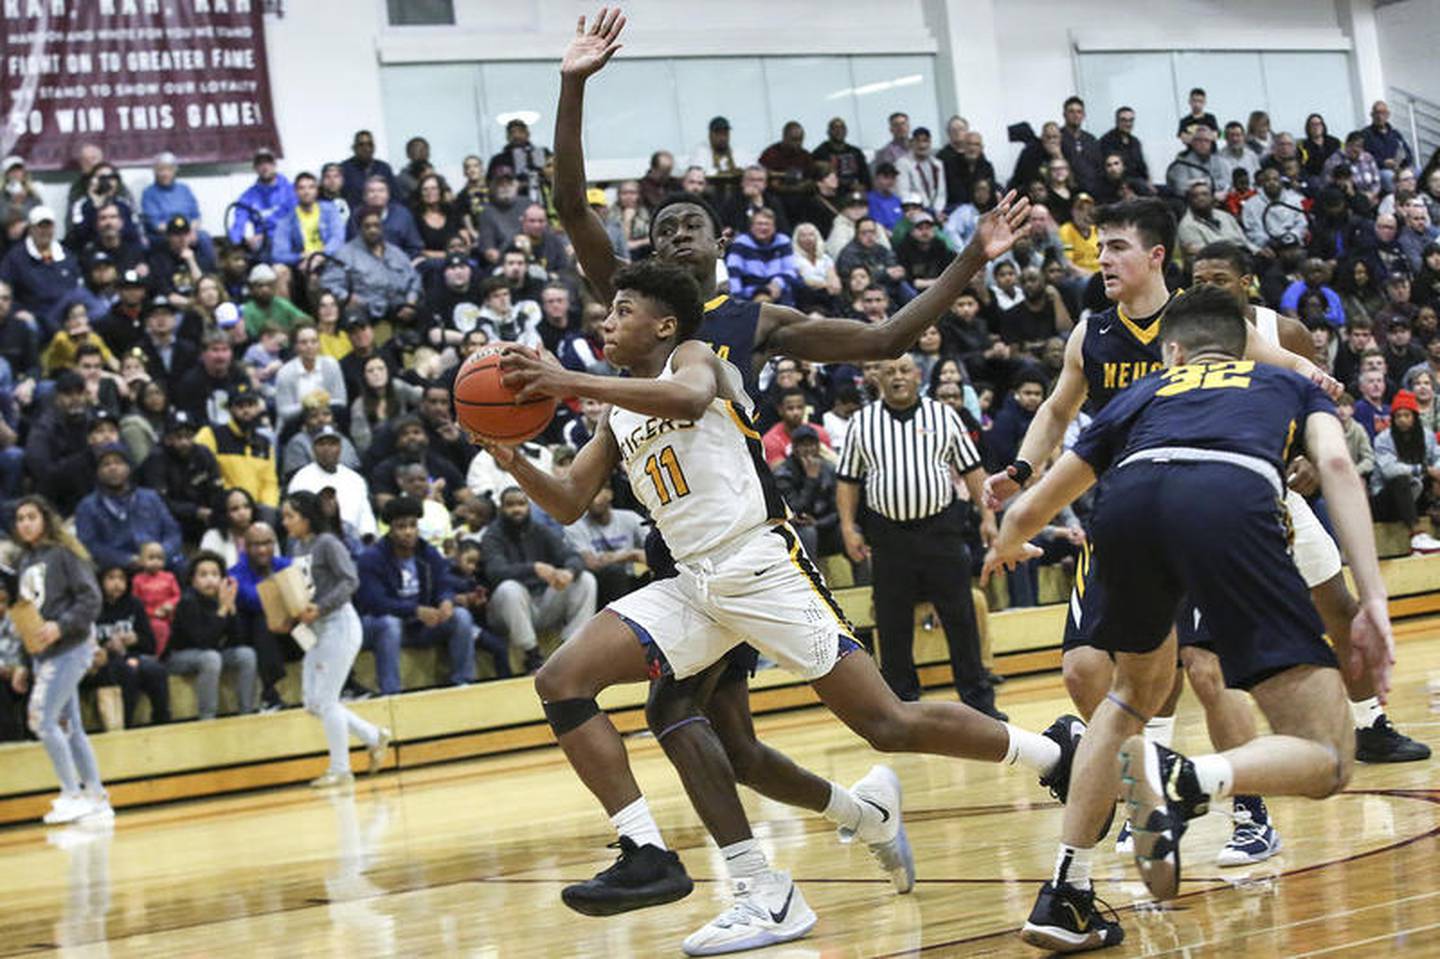 Joliet West's Jeremy Fears Jr. takers takes the ball to the net Tuesday, March 10, 2020, at Lockport Township High School in Lockport, Ill. The Tigers defeated the Wildcats, 50-40.